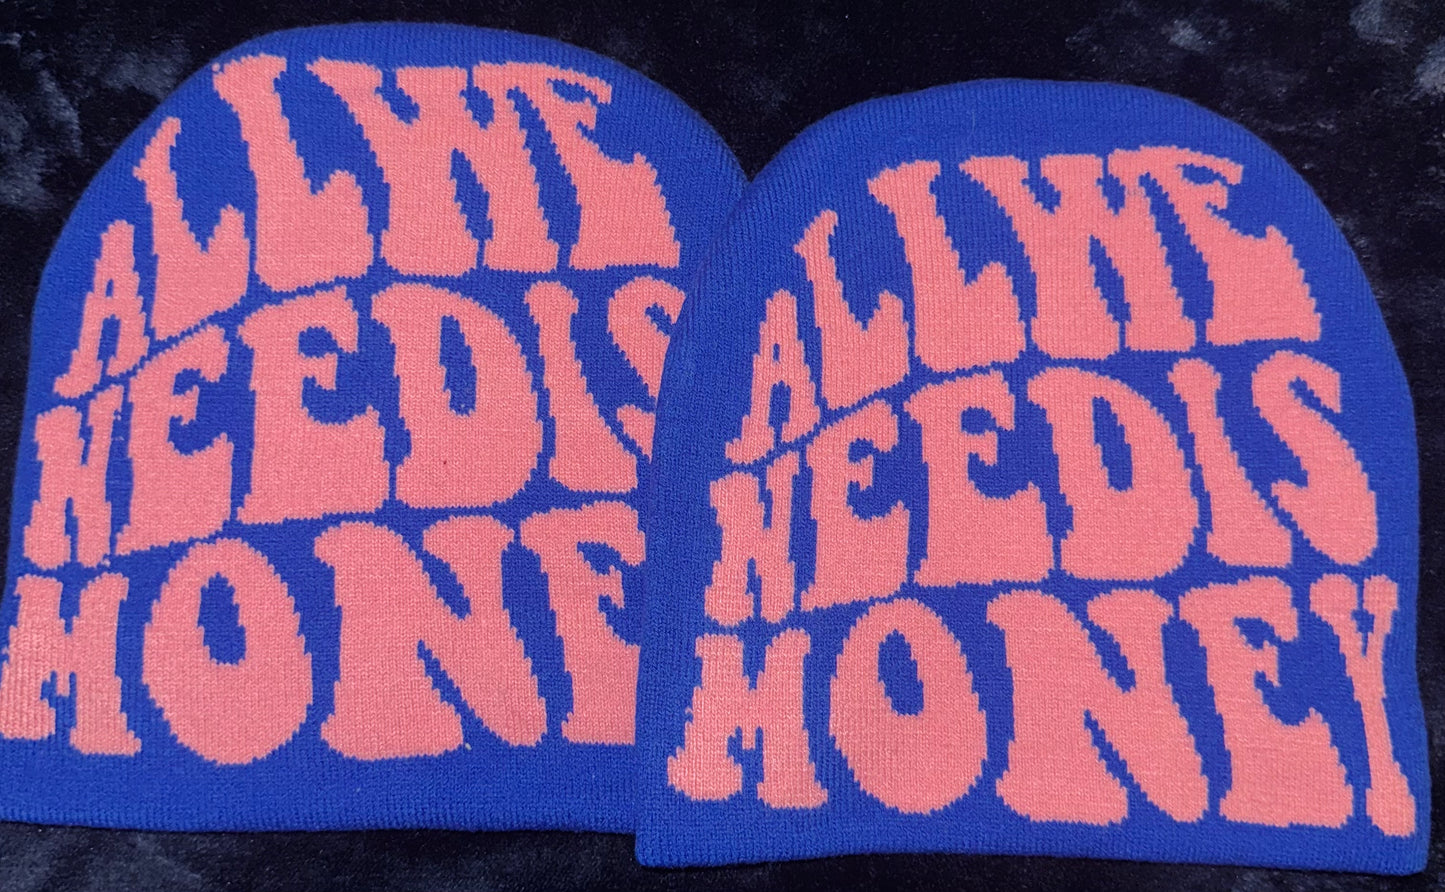 All We Need Is Money Beanie